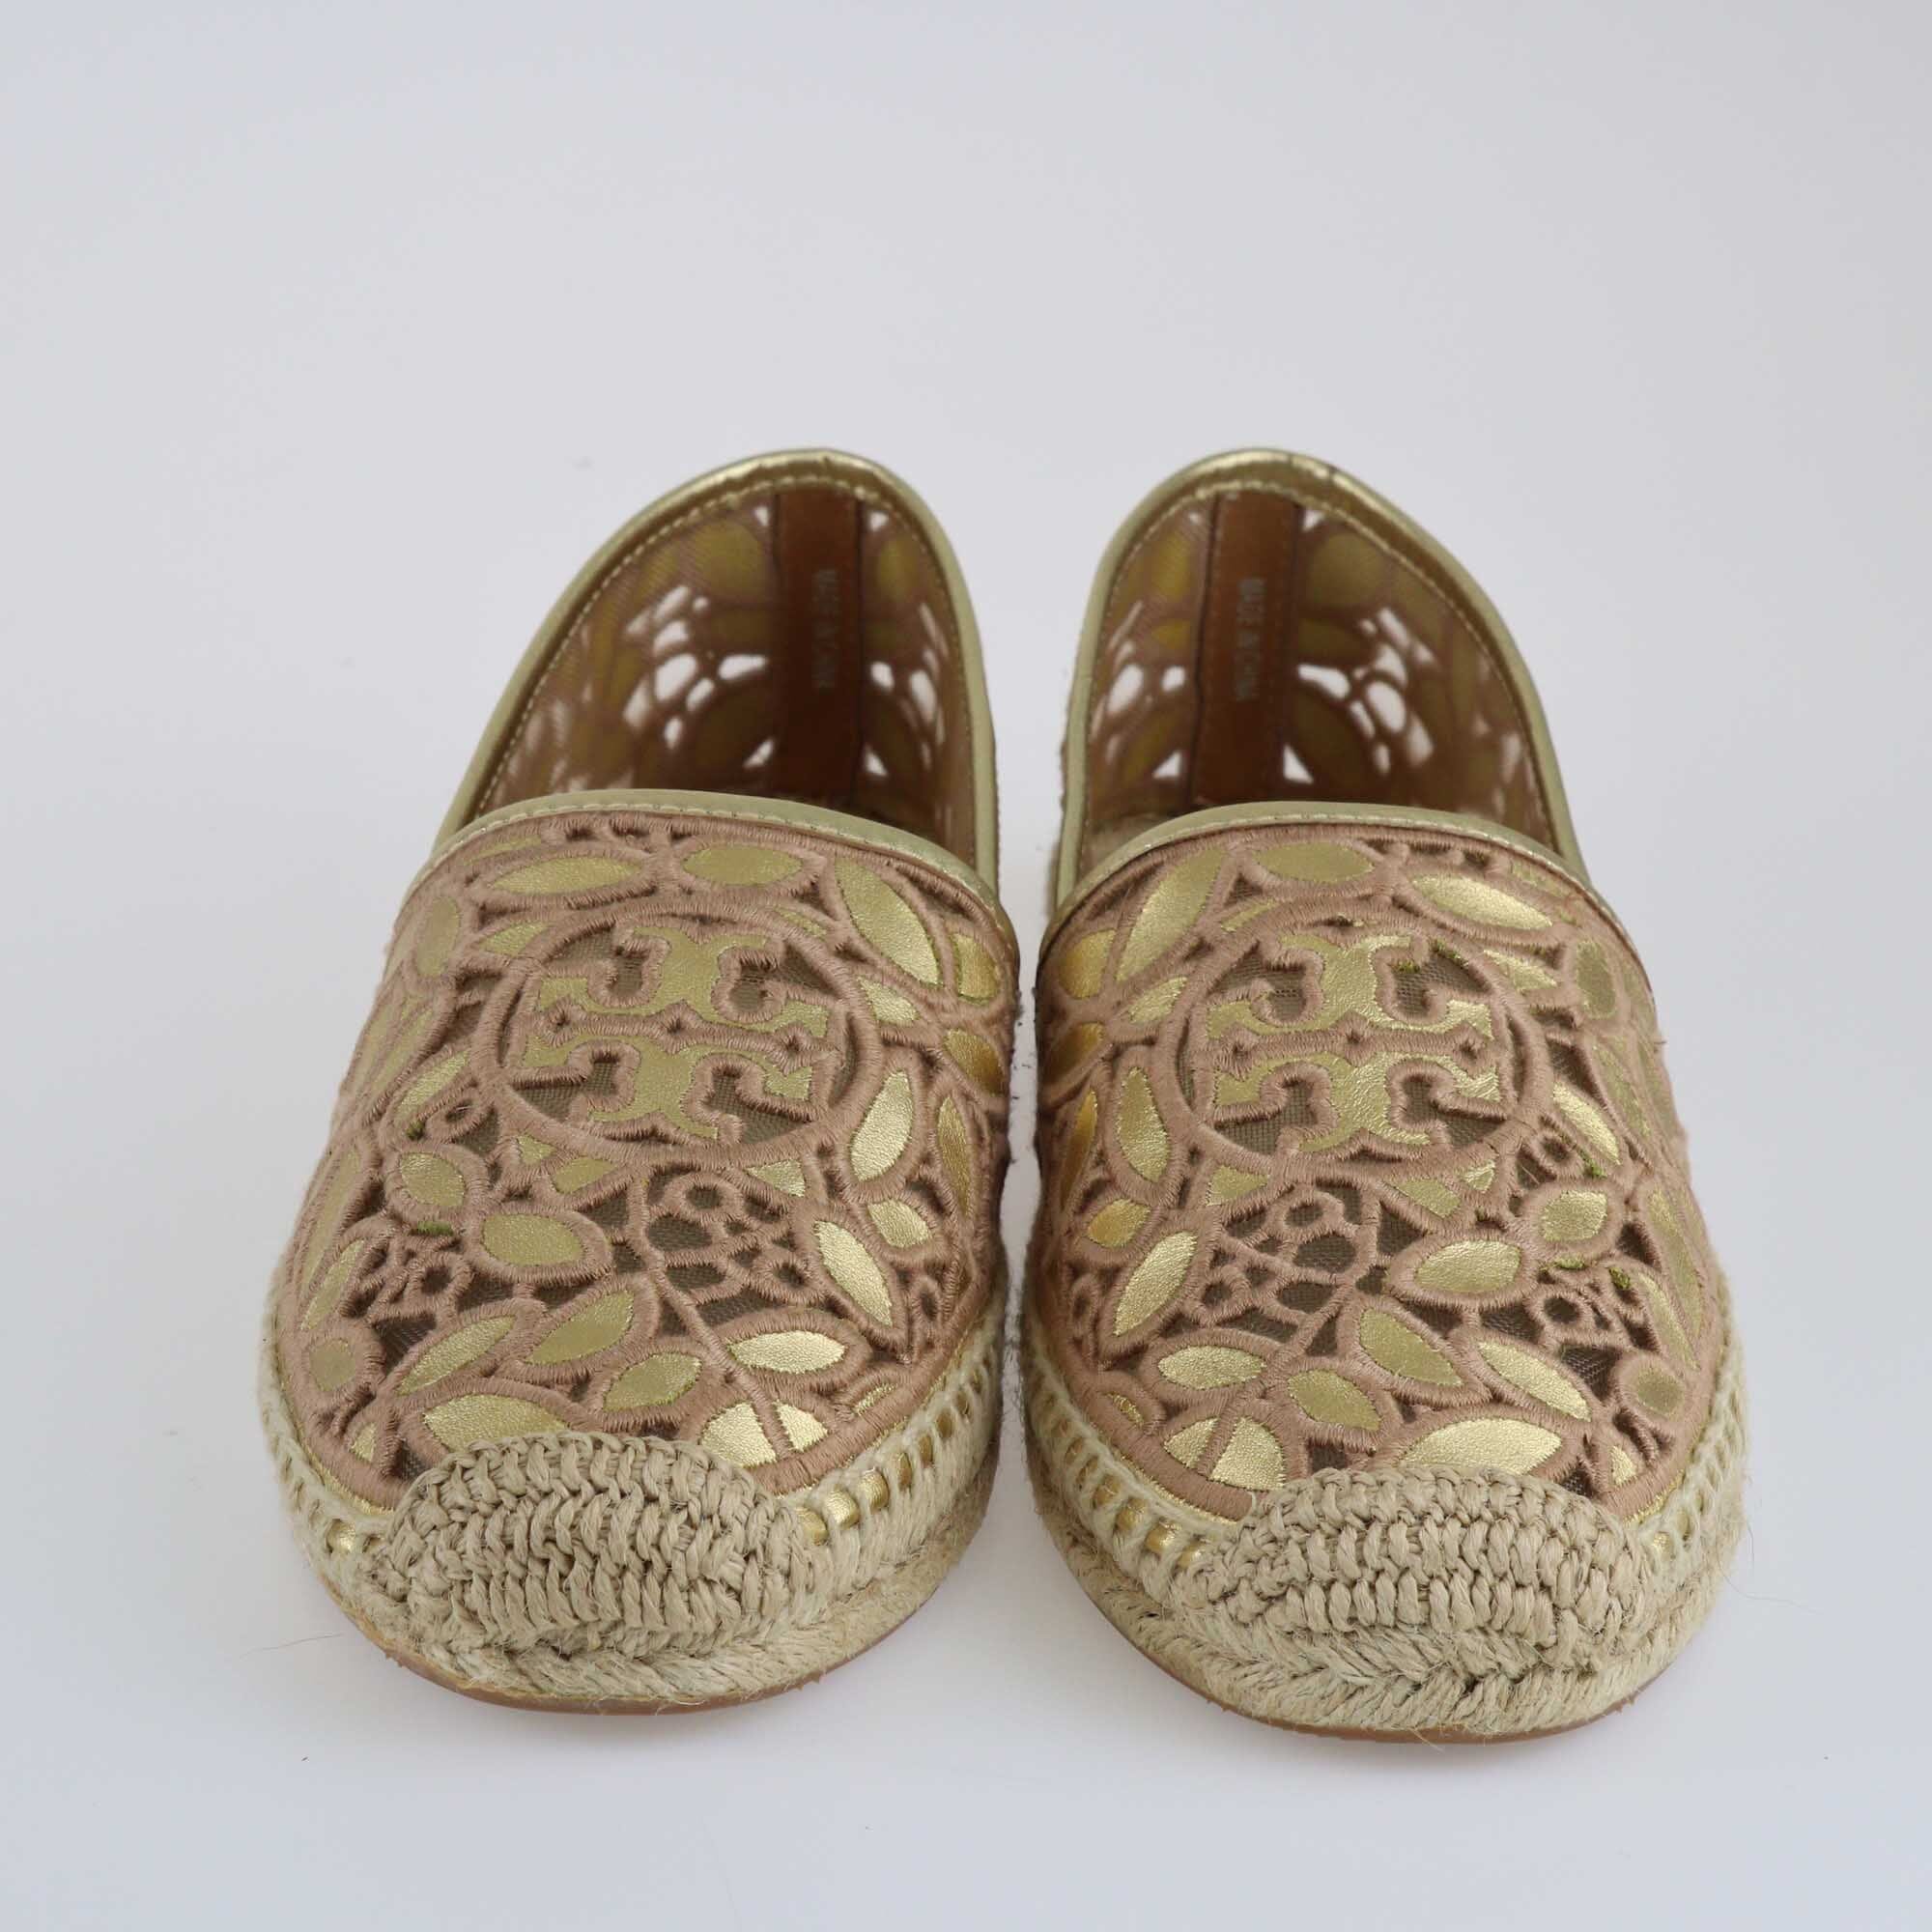 Tory Burch Gold/Natural Leather and Mesh Embroidered Rhea Leaf Espadrille Flats Shoes Tory Burch 